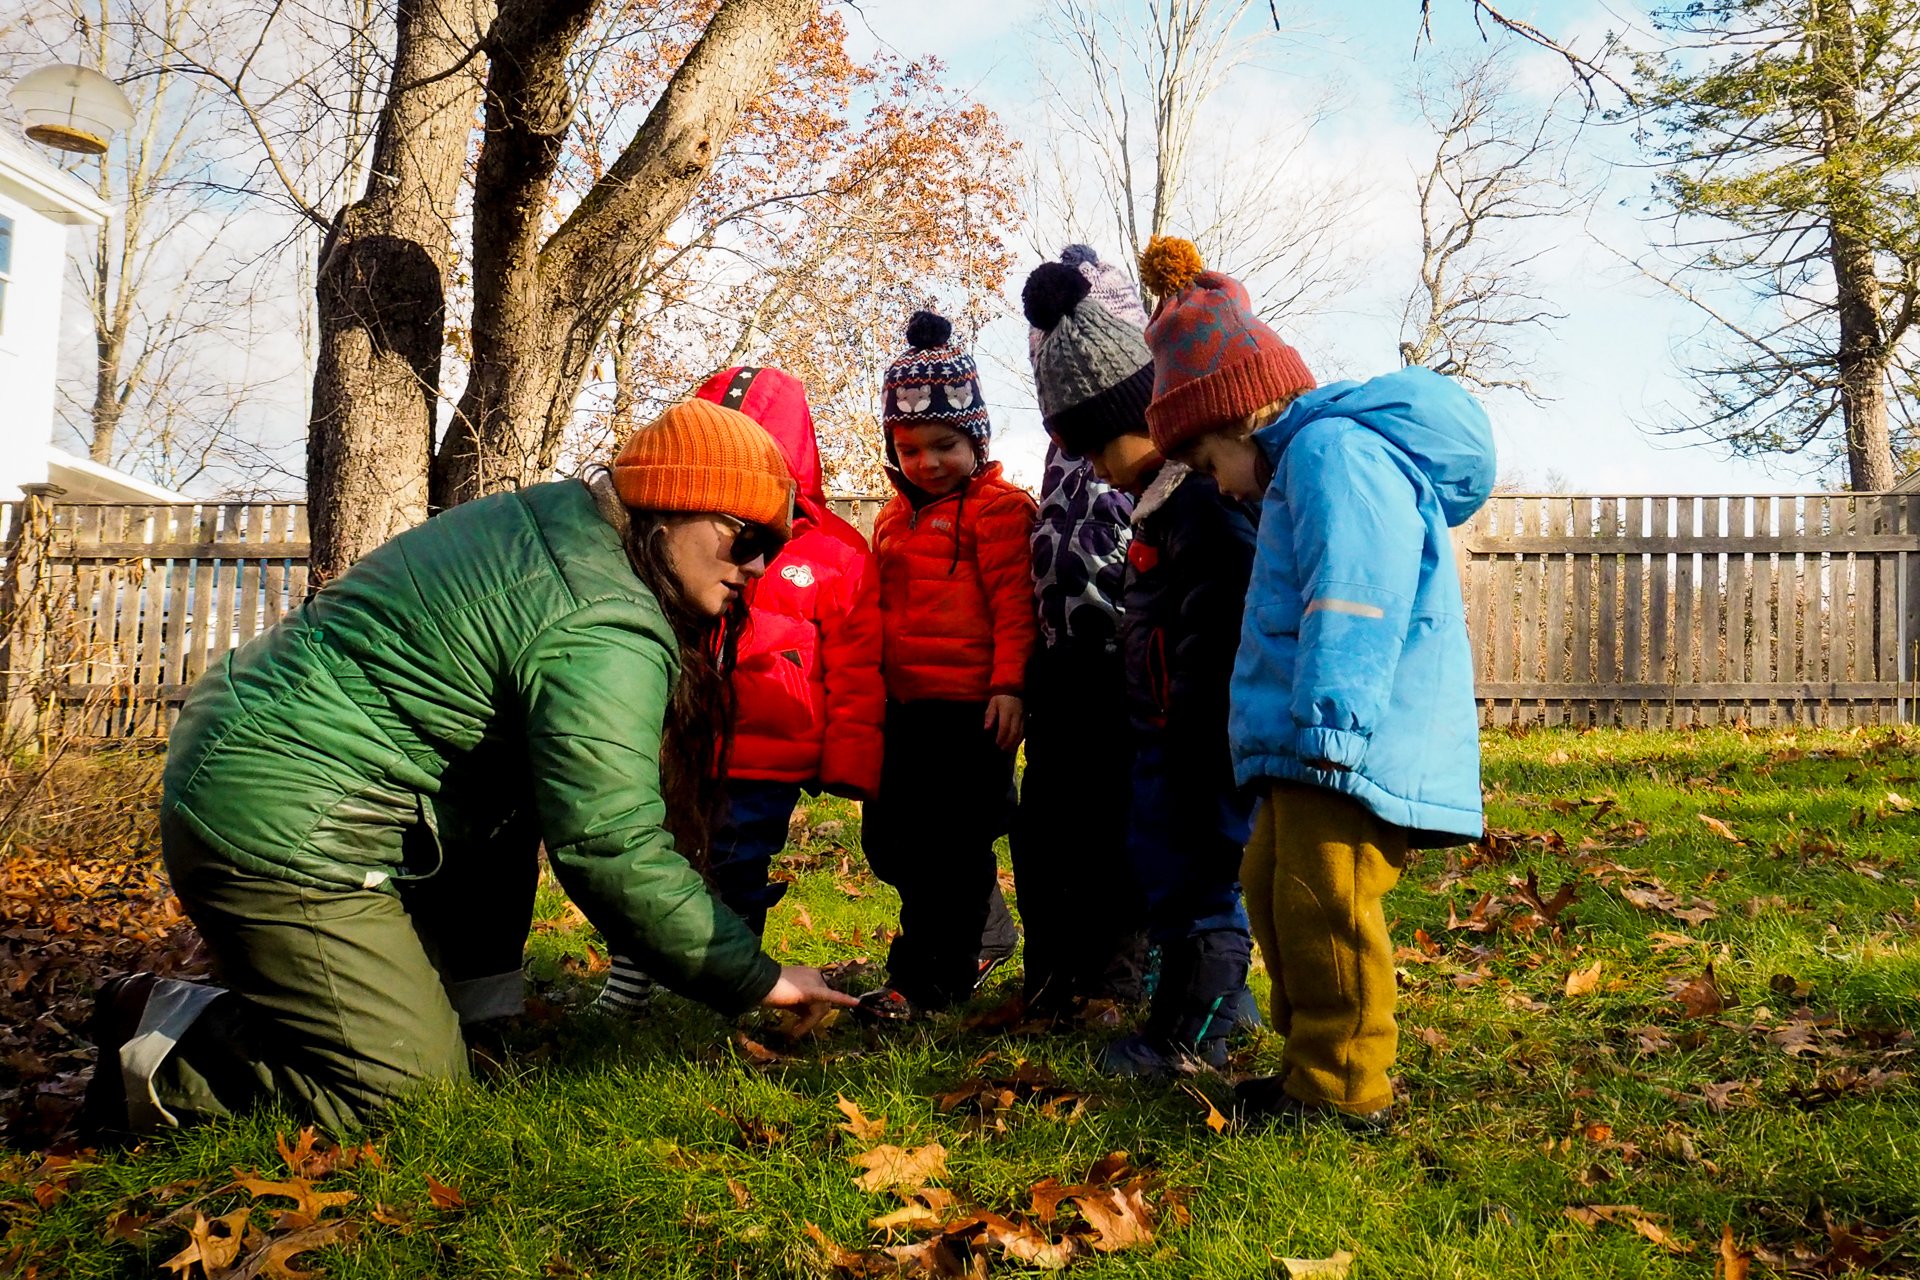 A group of preschoolers in winter coats and hats huddle around their teacher who is kneeling in the grass and pointing to autumn leaves on the ground